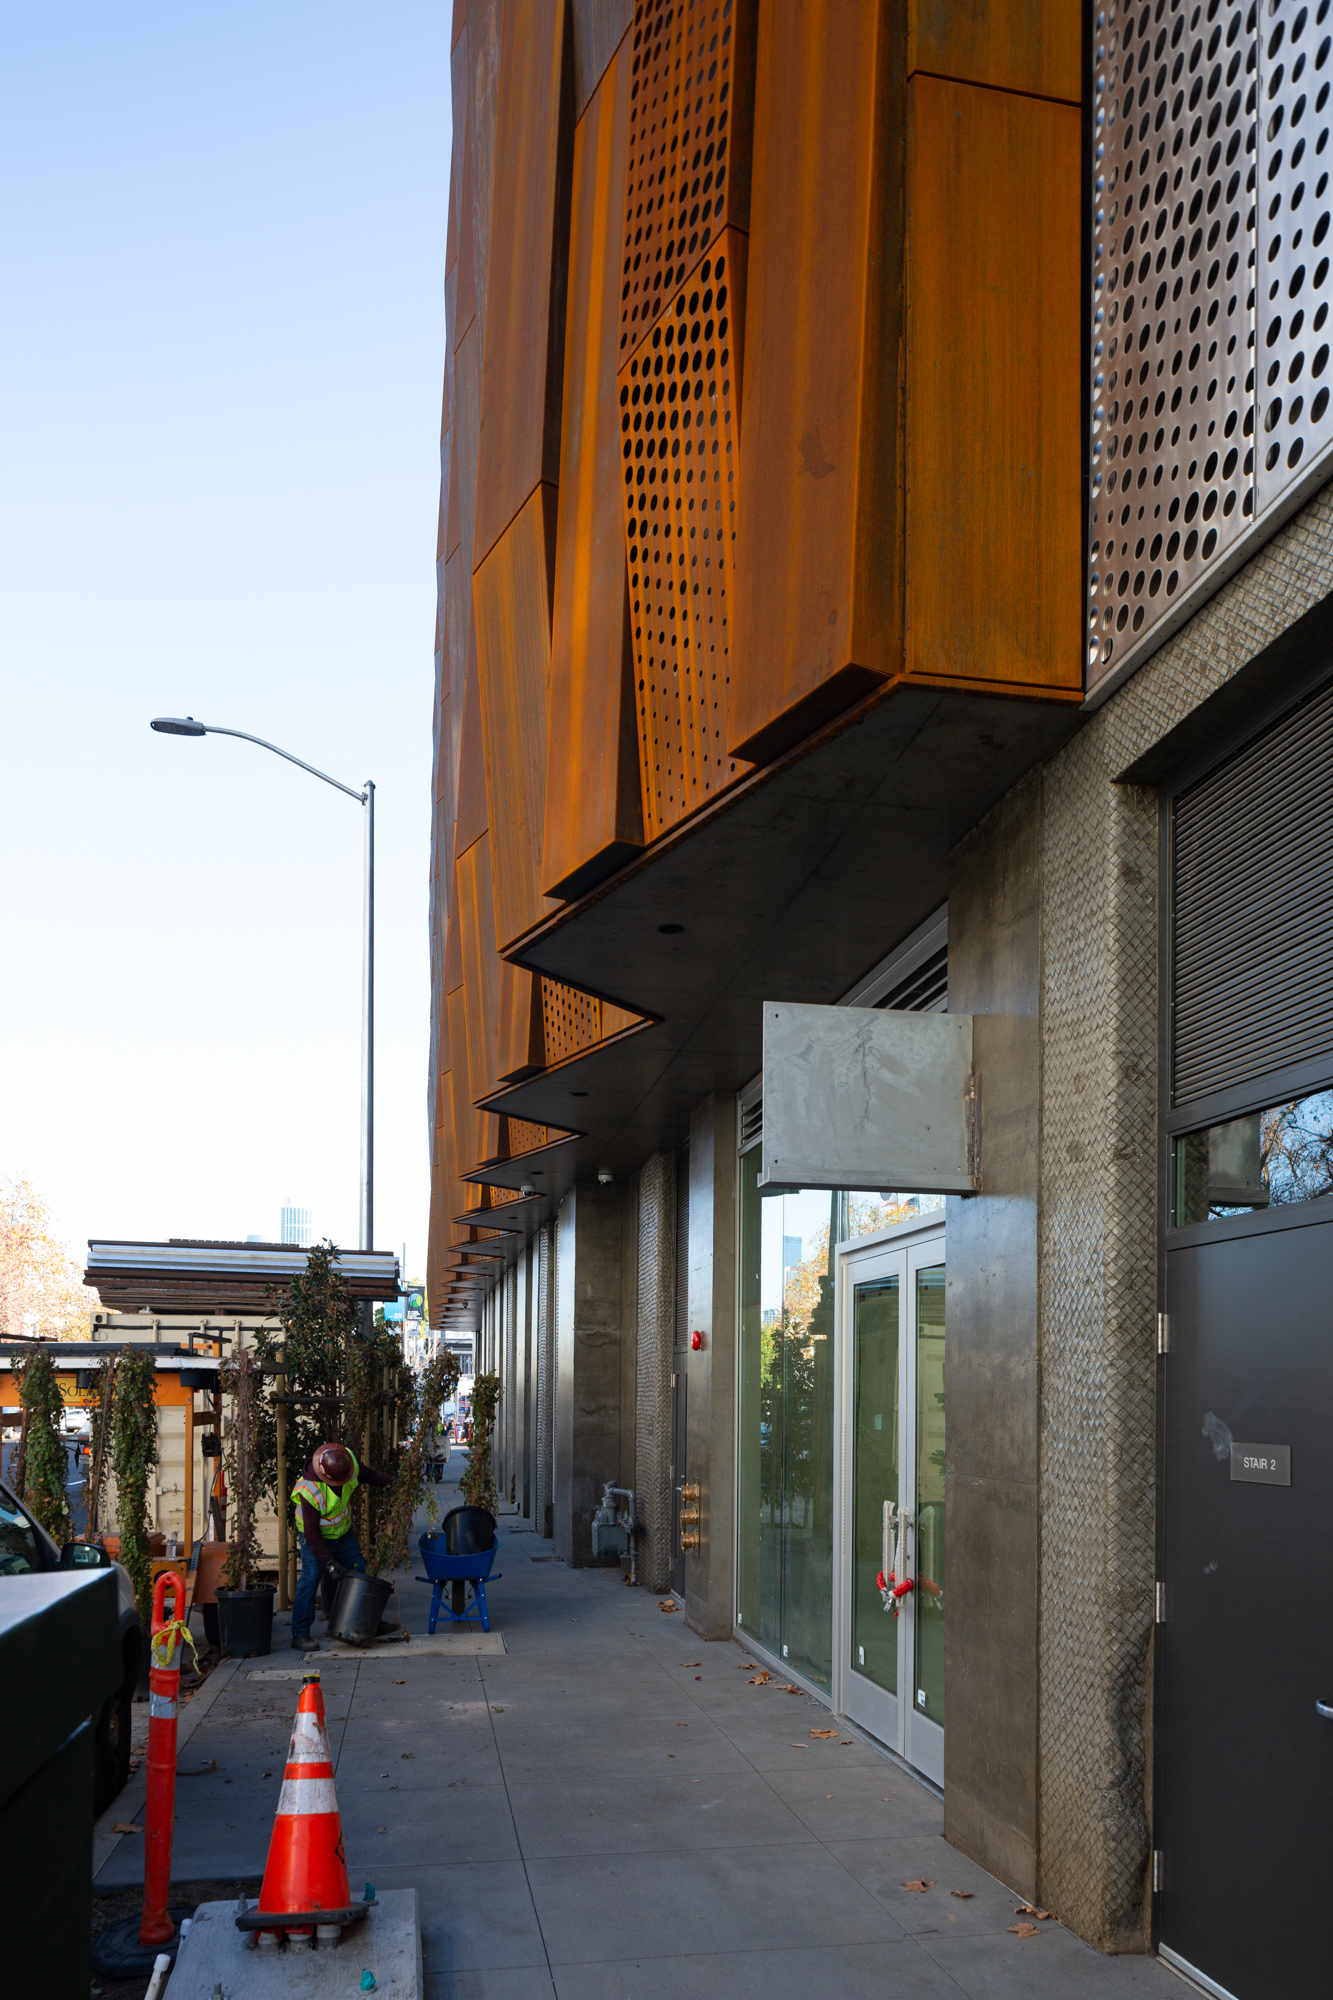 833 Bryant Street pedestrian level, image by Andrew Campbell Nelson